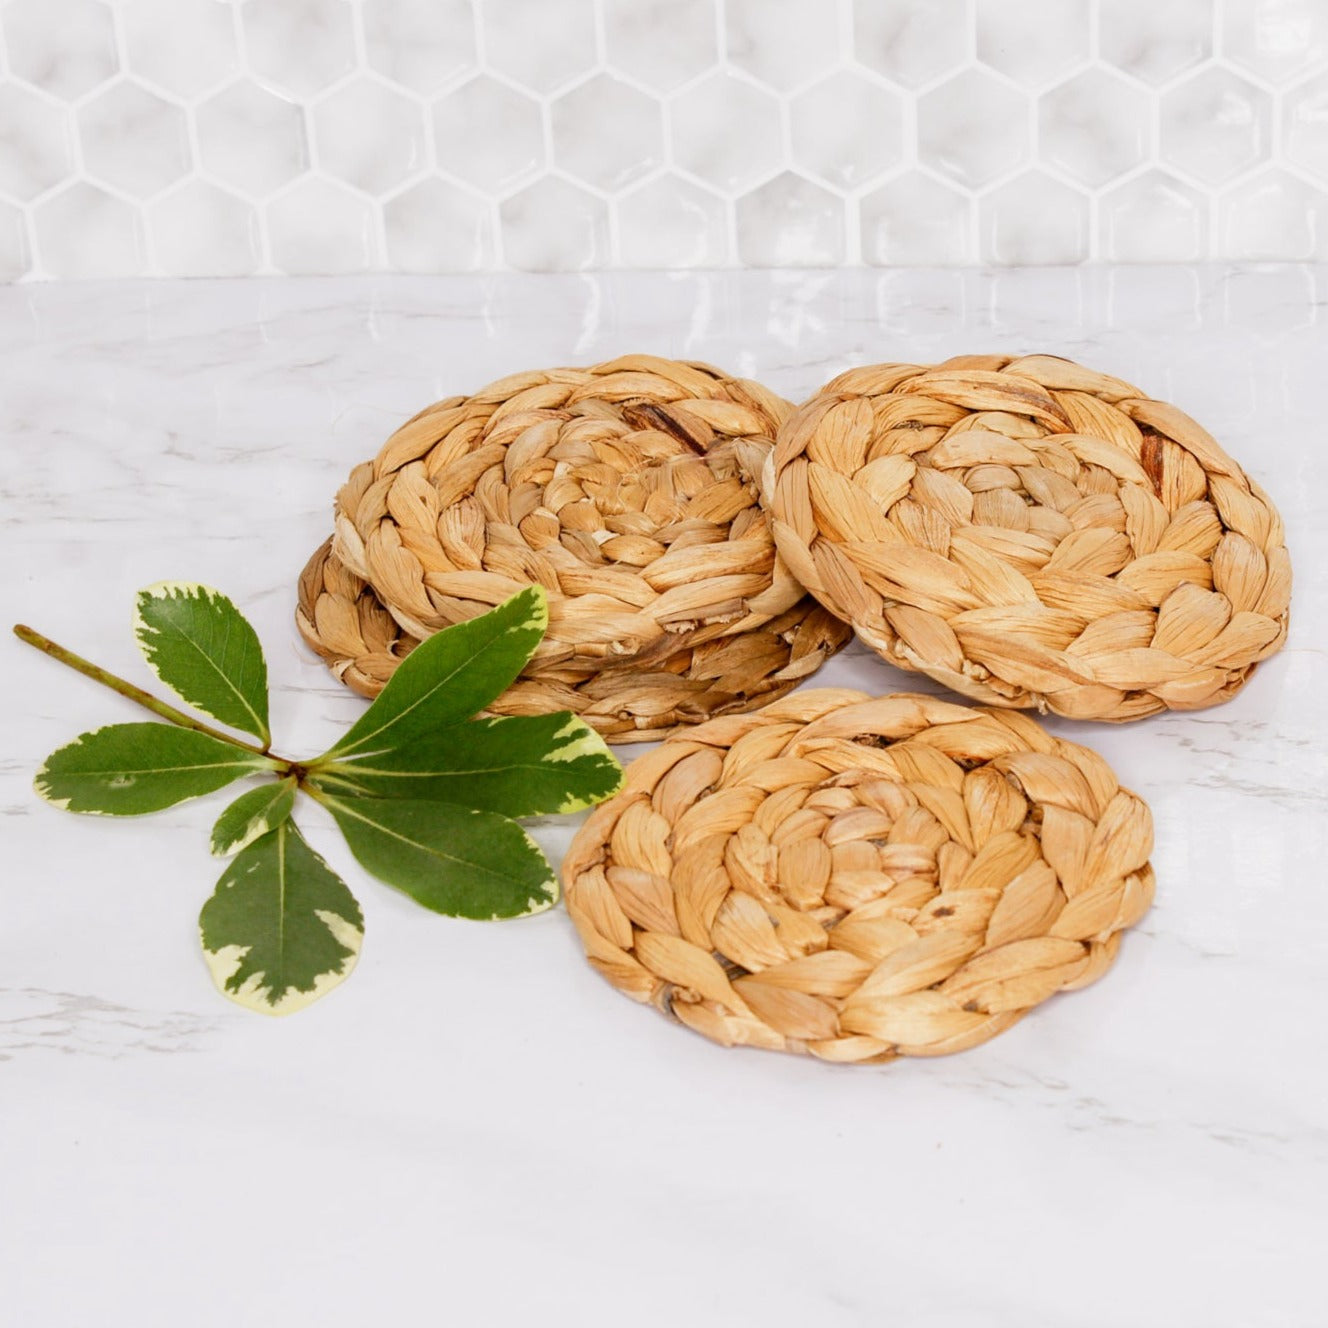 On a marble countertop, 4 round seagrass coasters sit next to a small piece of greenery